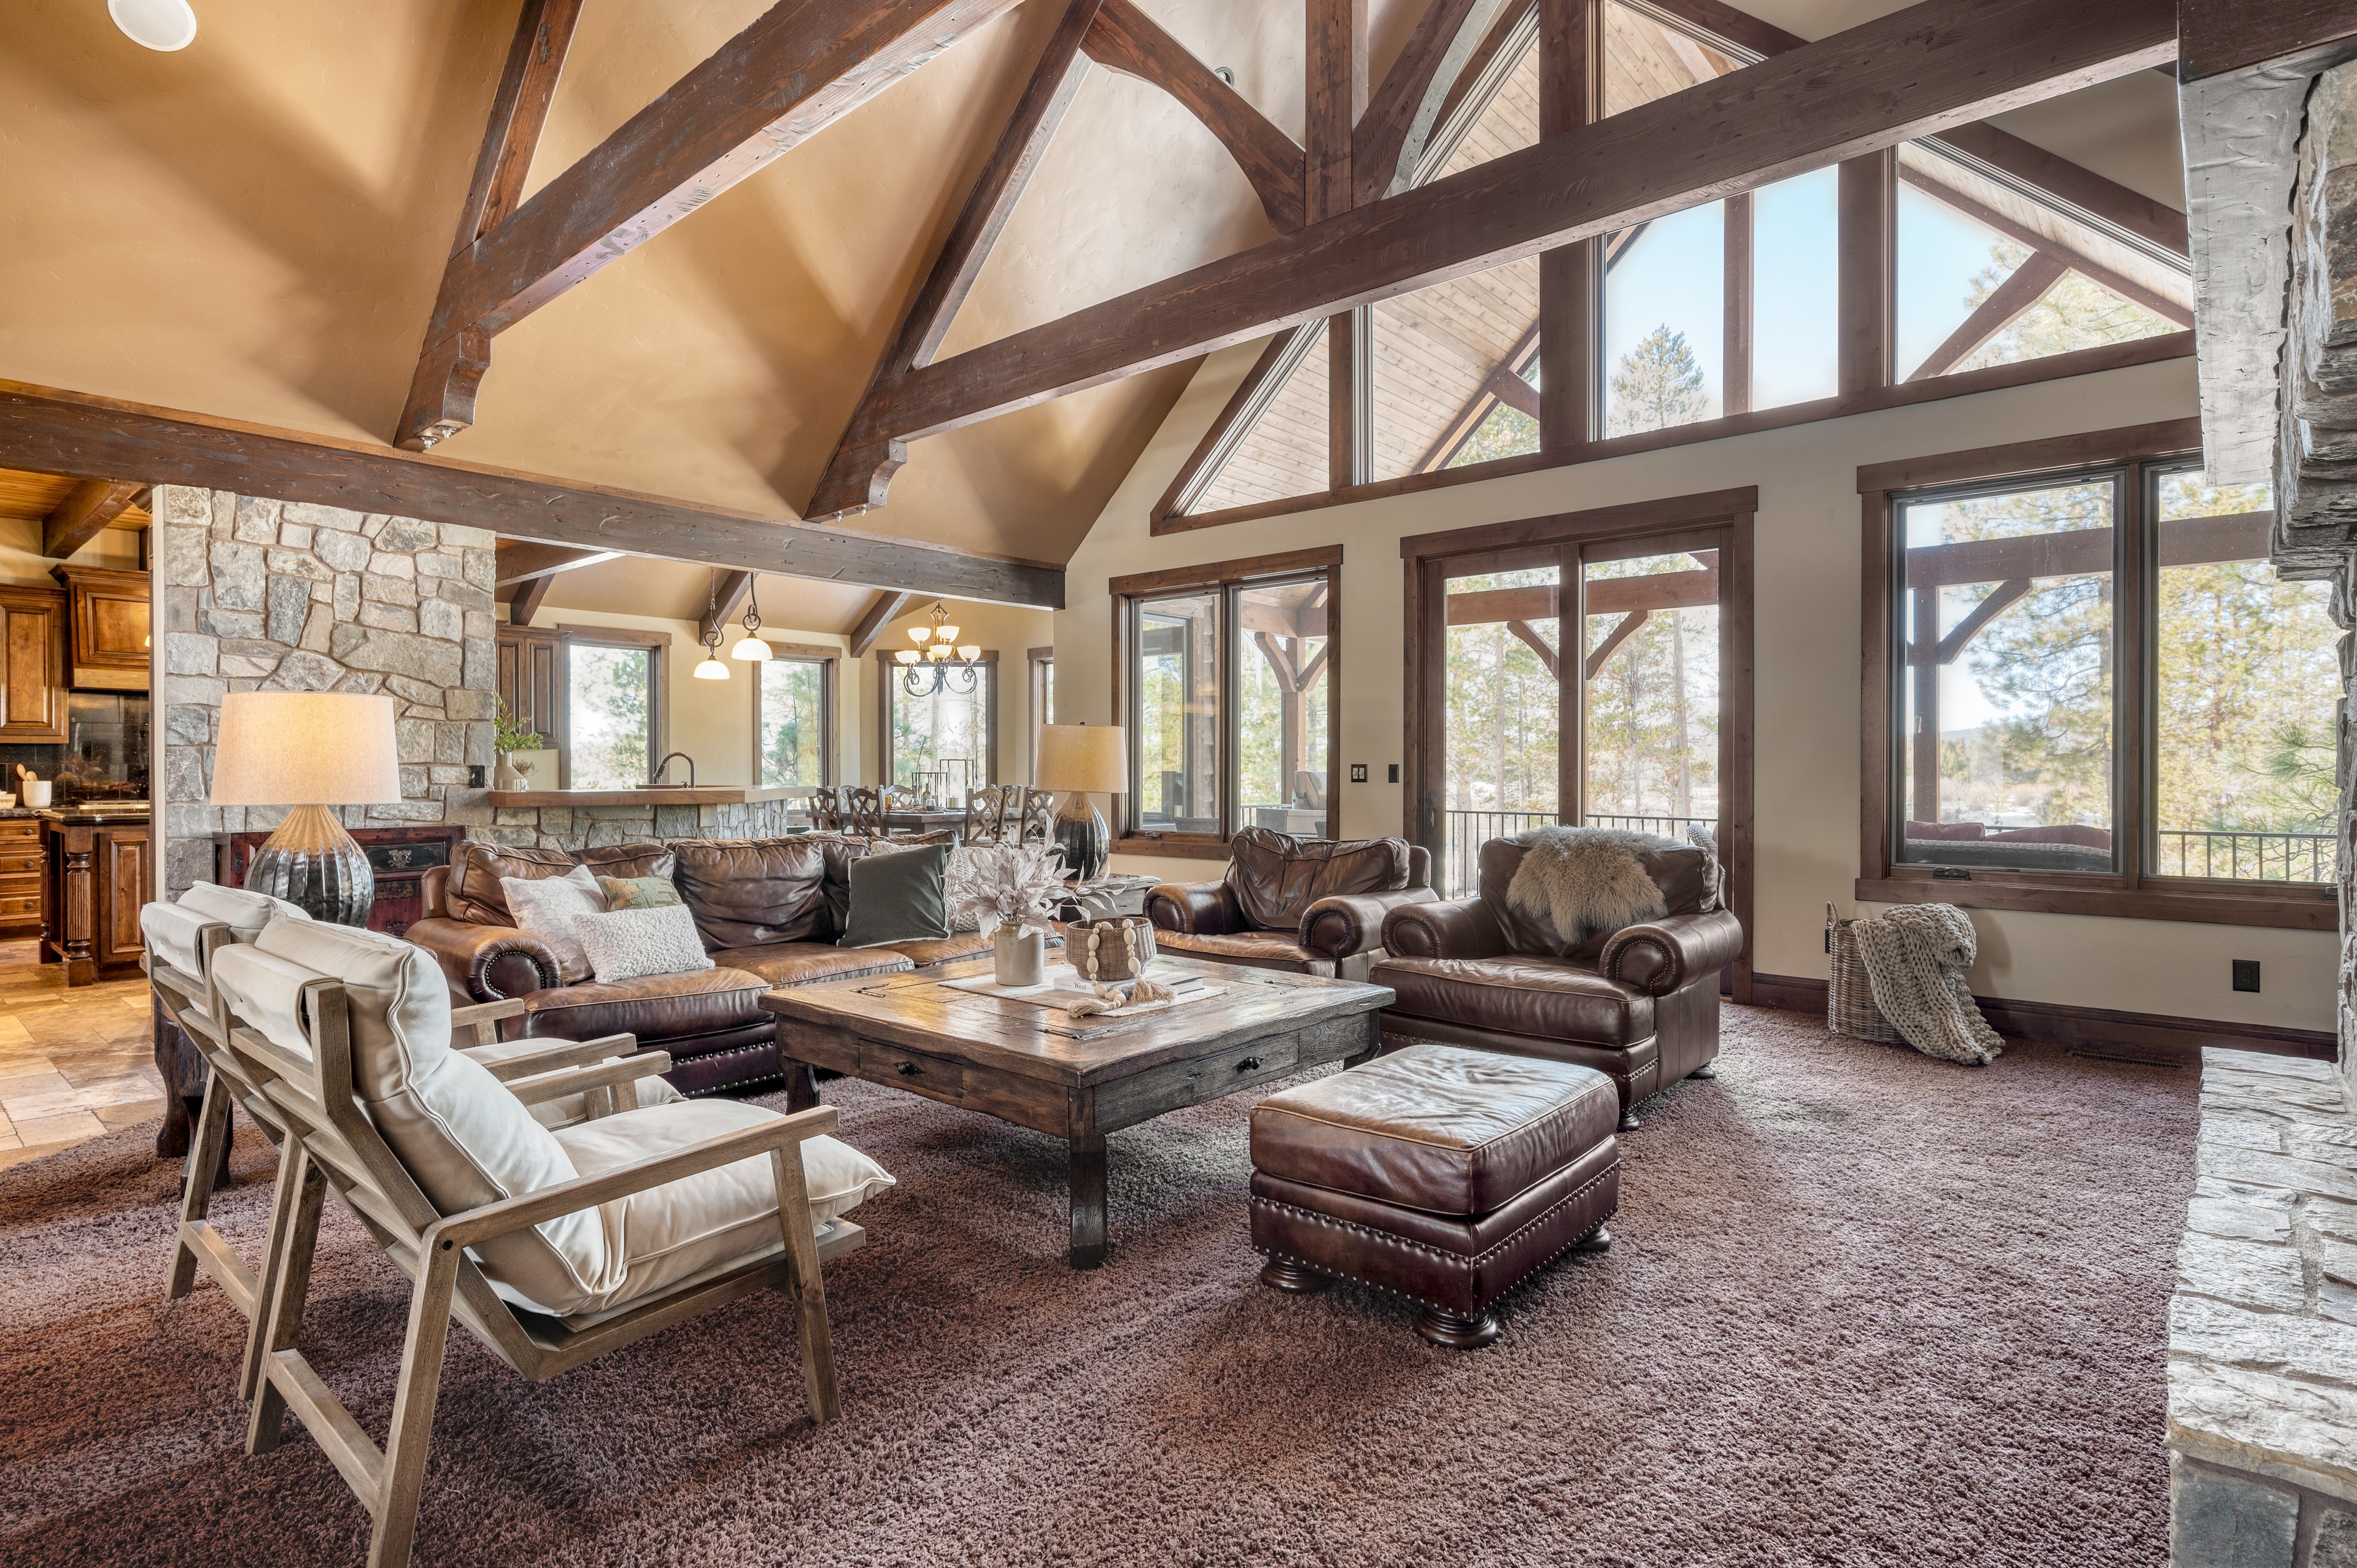 Spacious main living room features high ceilings and plenty of seating.